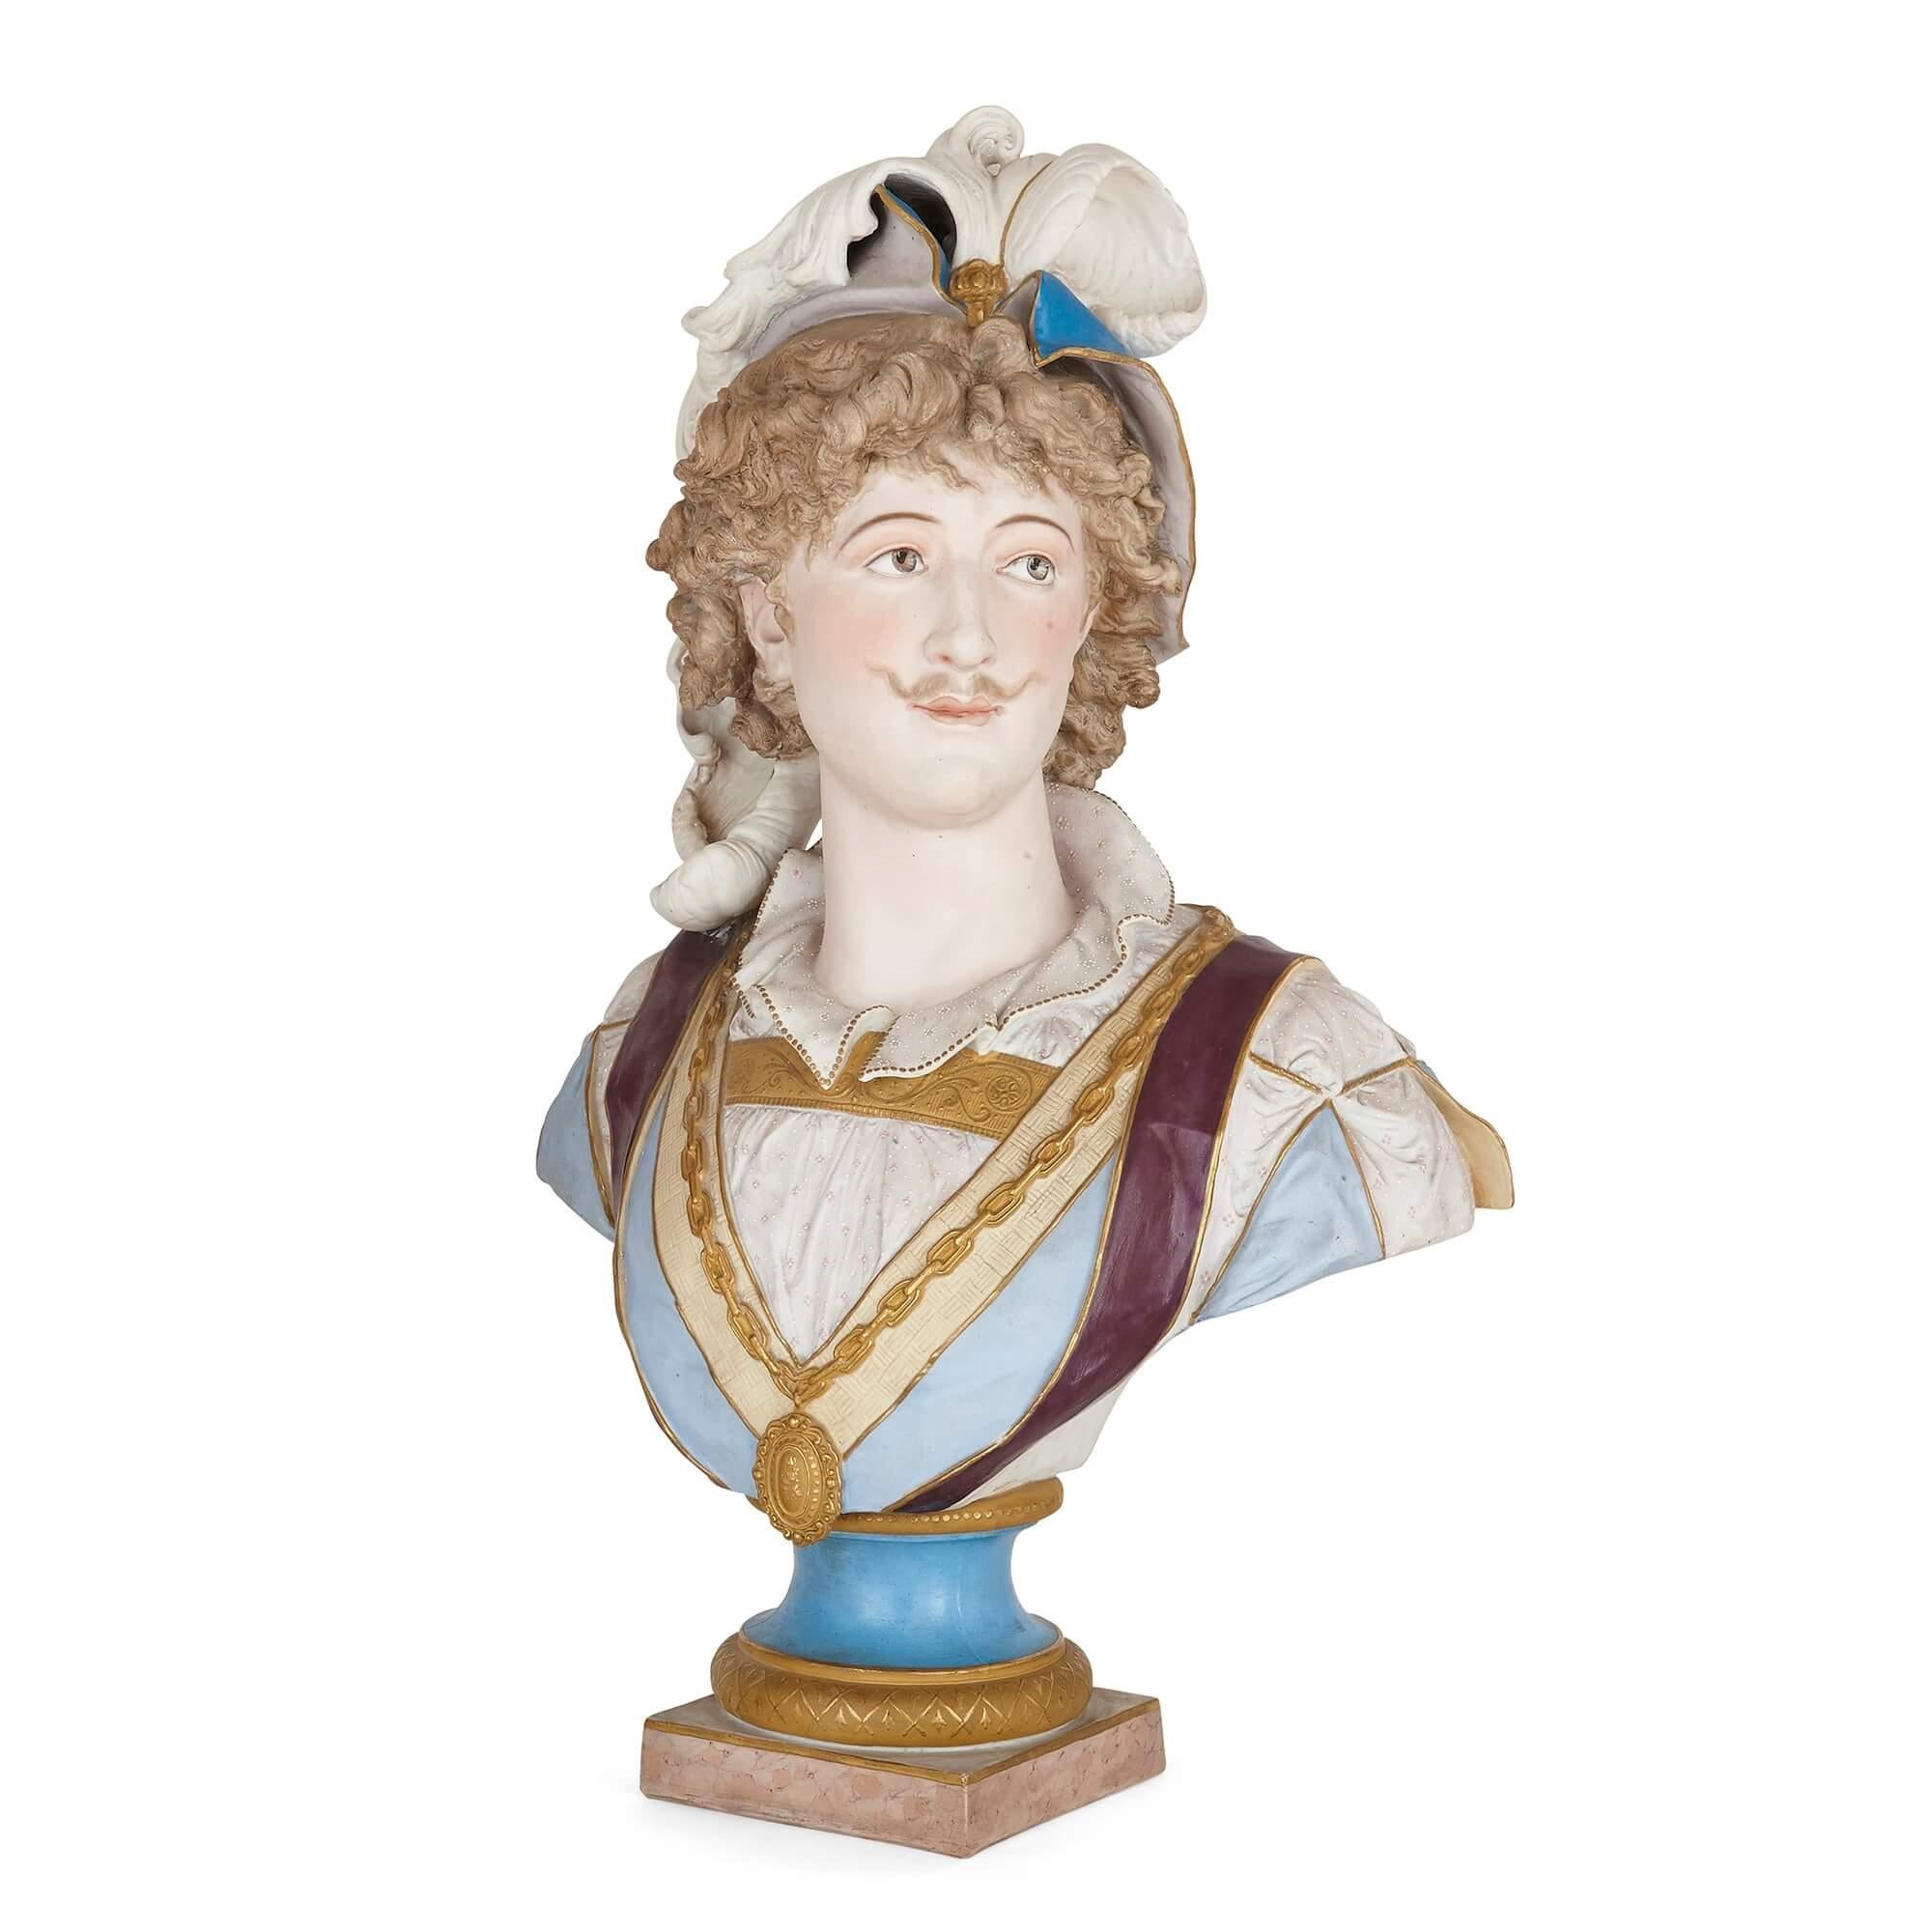 French bisque porcelain portrait bust in the Renaissance manner.
French, 19th Century
Measures: height 65 cm, width 40 cm, depth 22 cm.

This bust is crafted from finely painted bisque porcelain. The bust portrays a young man in Renaissance